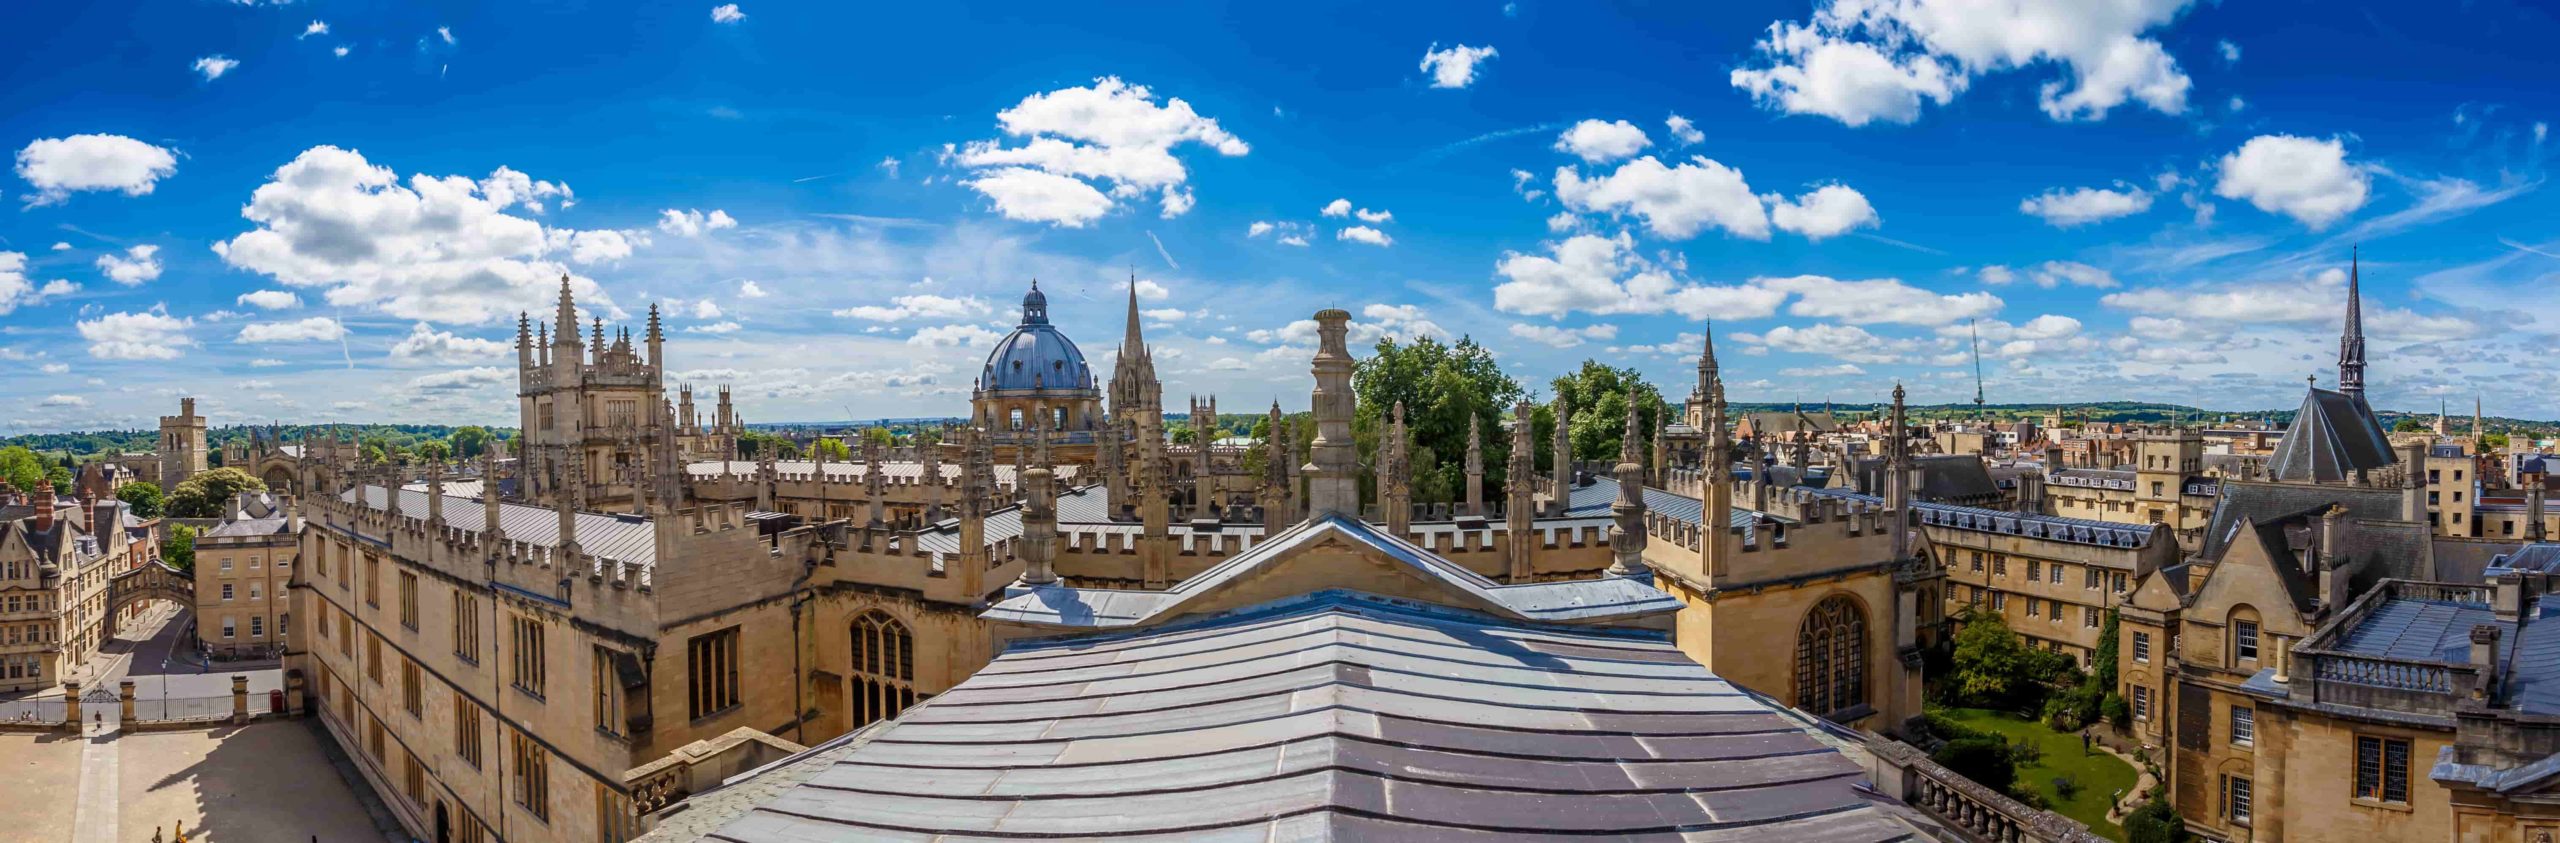 10 things you should know before moving to Oxford ‹ GO Blog